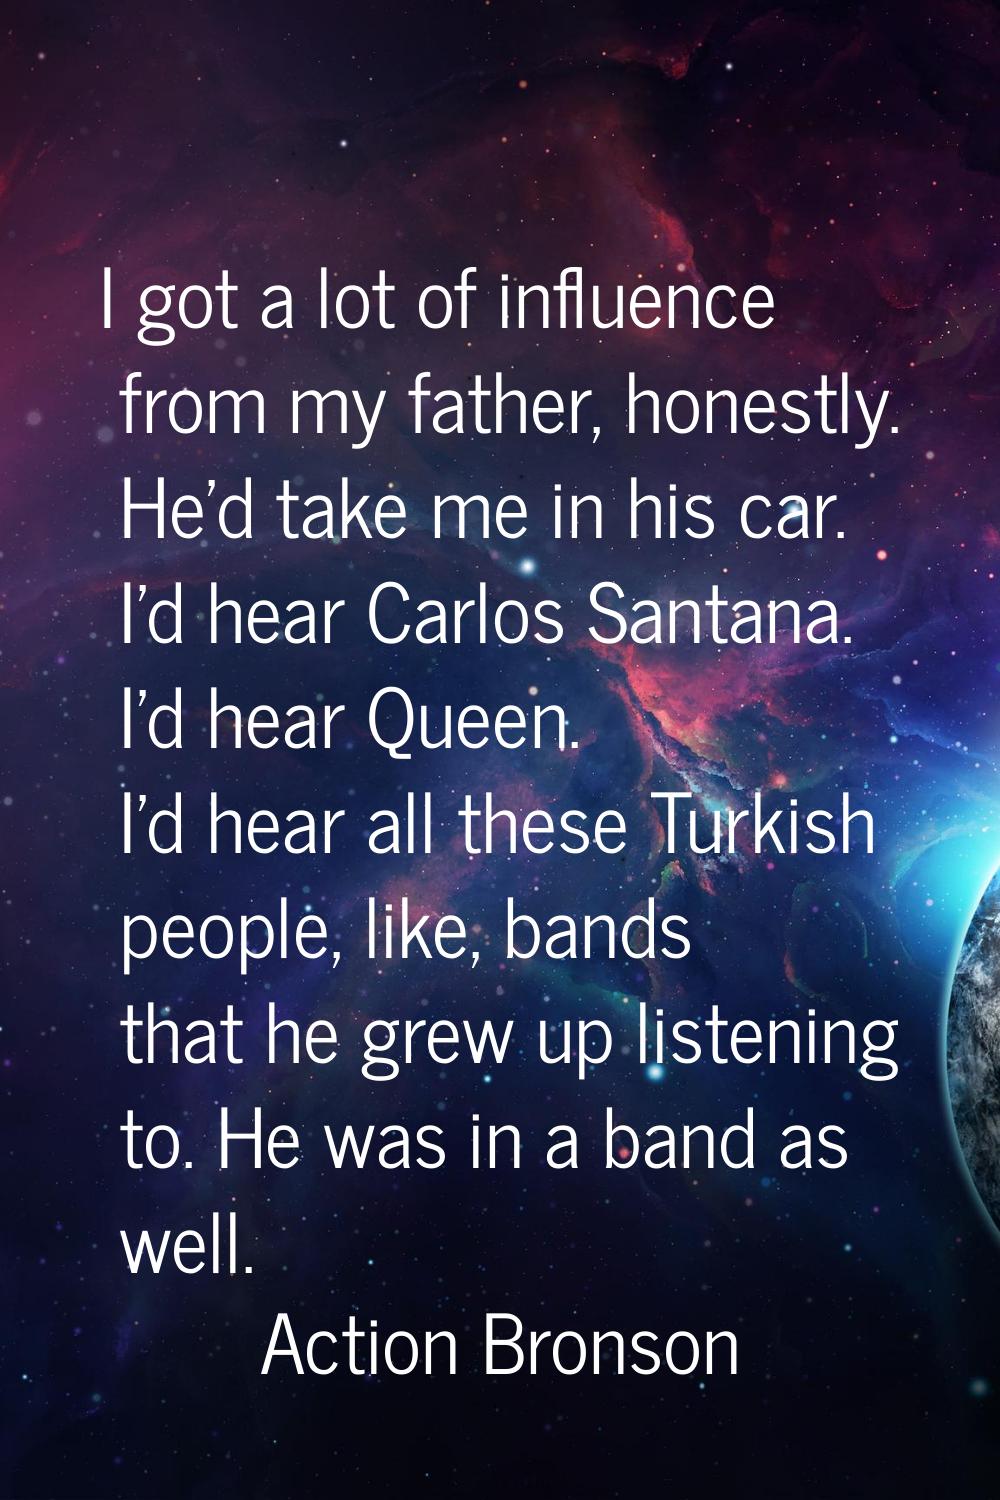 I got a lot of influence from my father, honestly. He'd take me in his car. I'd hear Carlos Santana